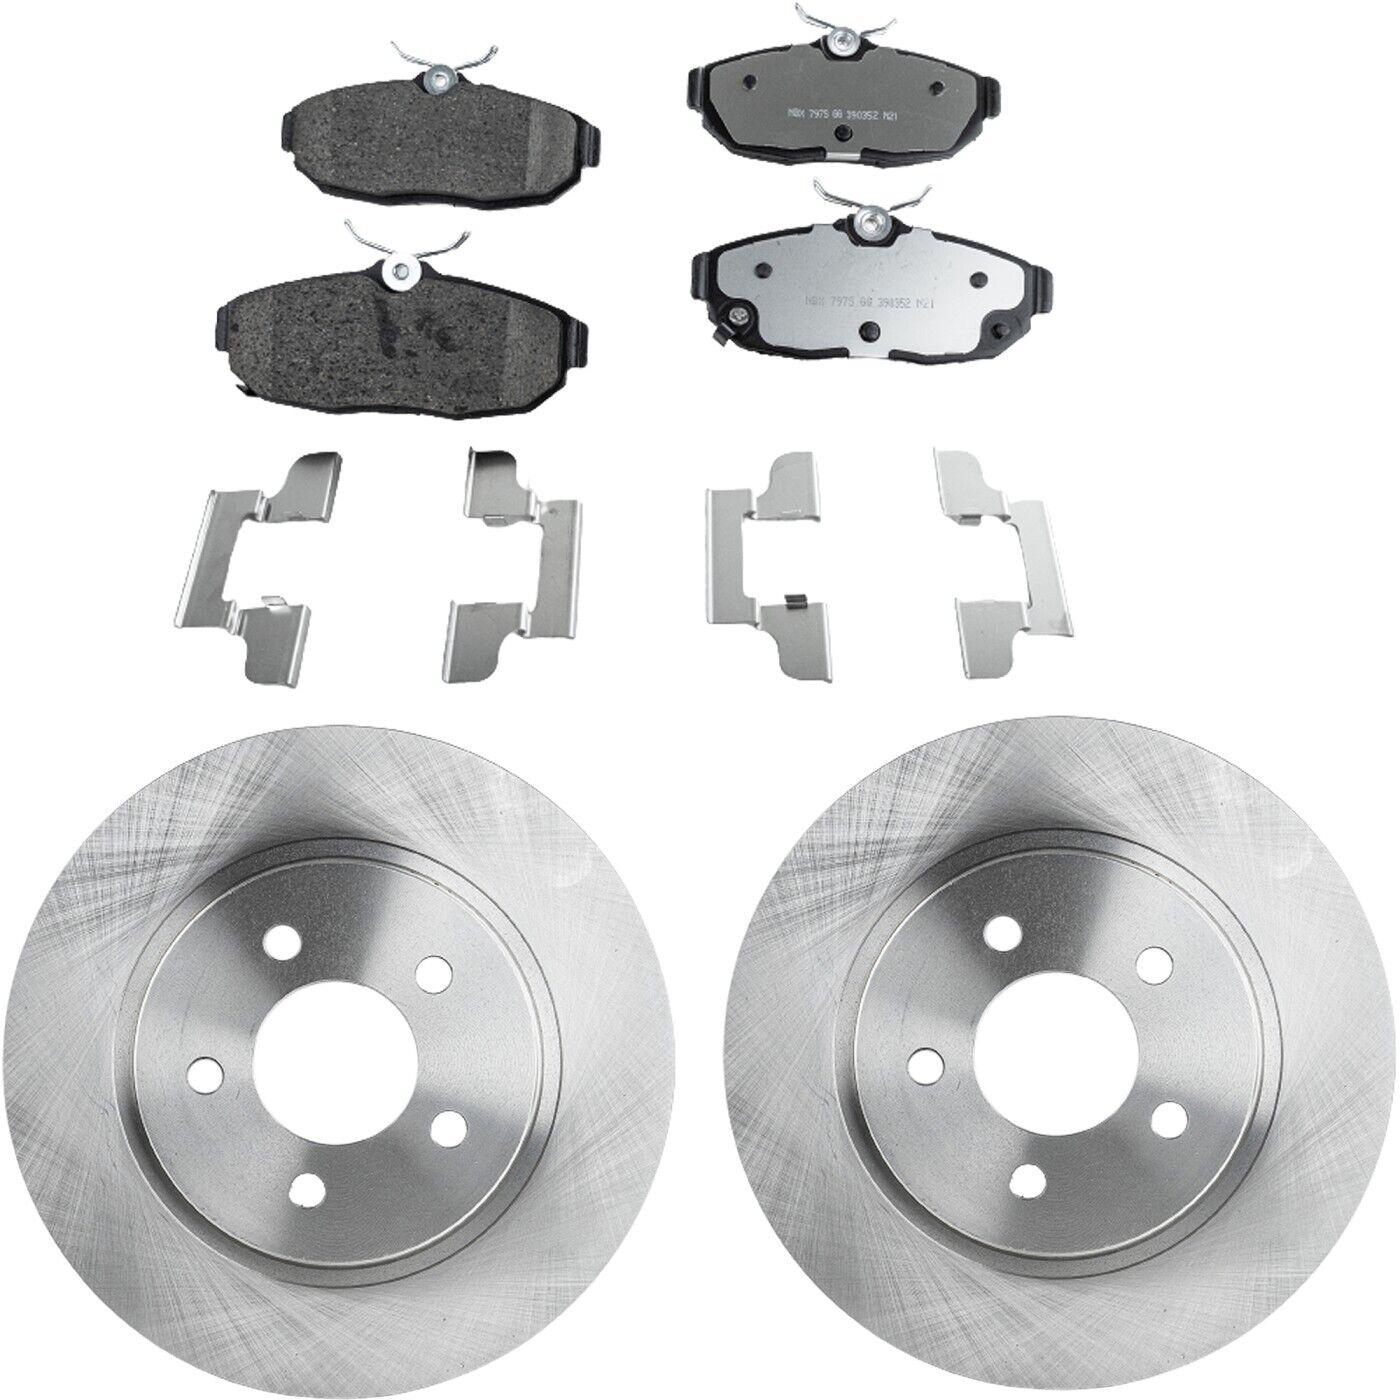 Brake Disc and Pad Kit For 2012-2014 Ford Mustang Rear